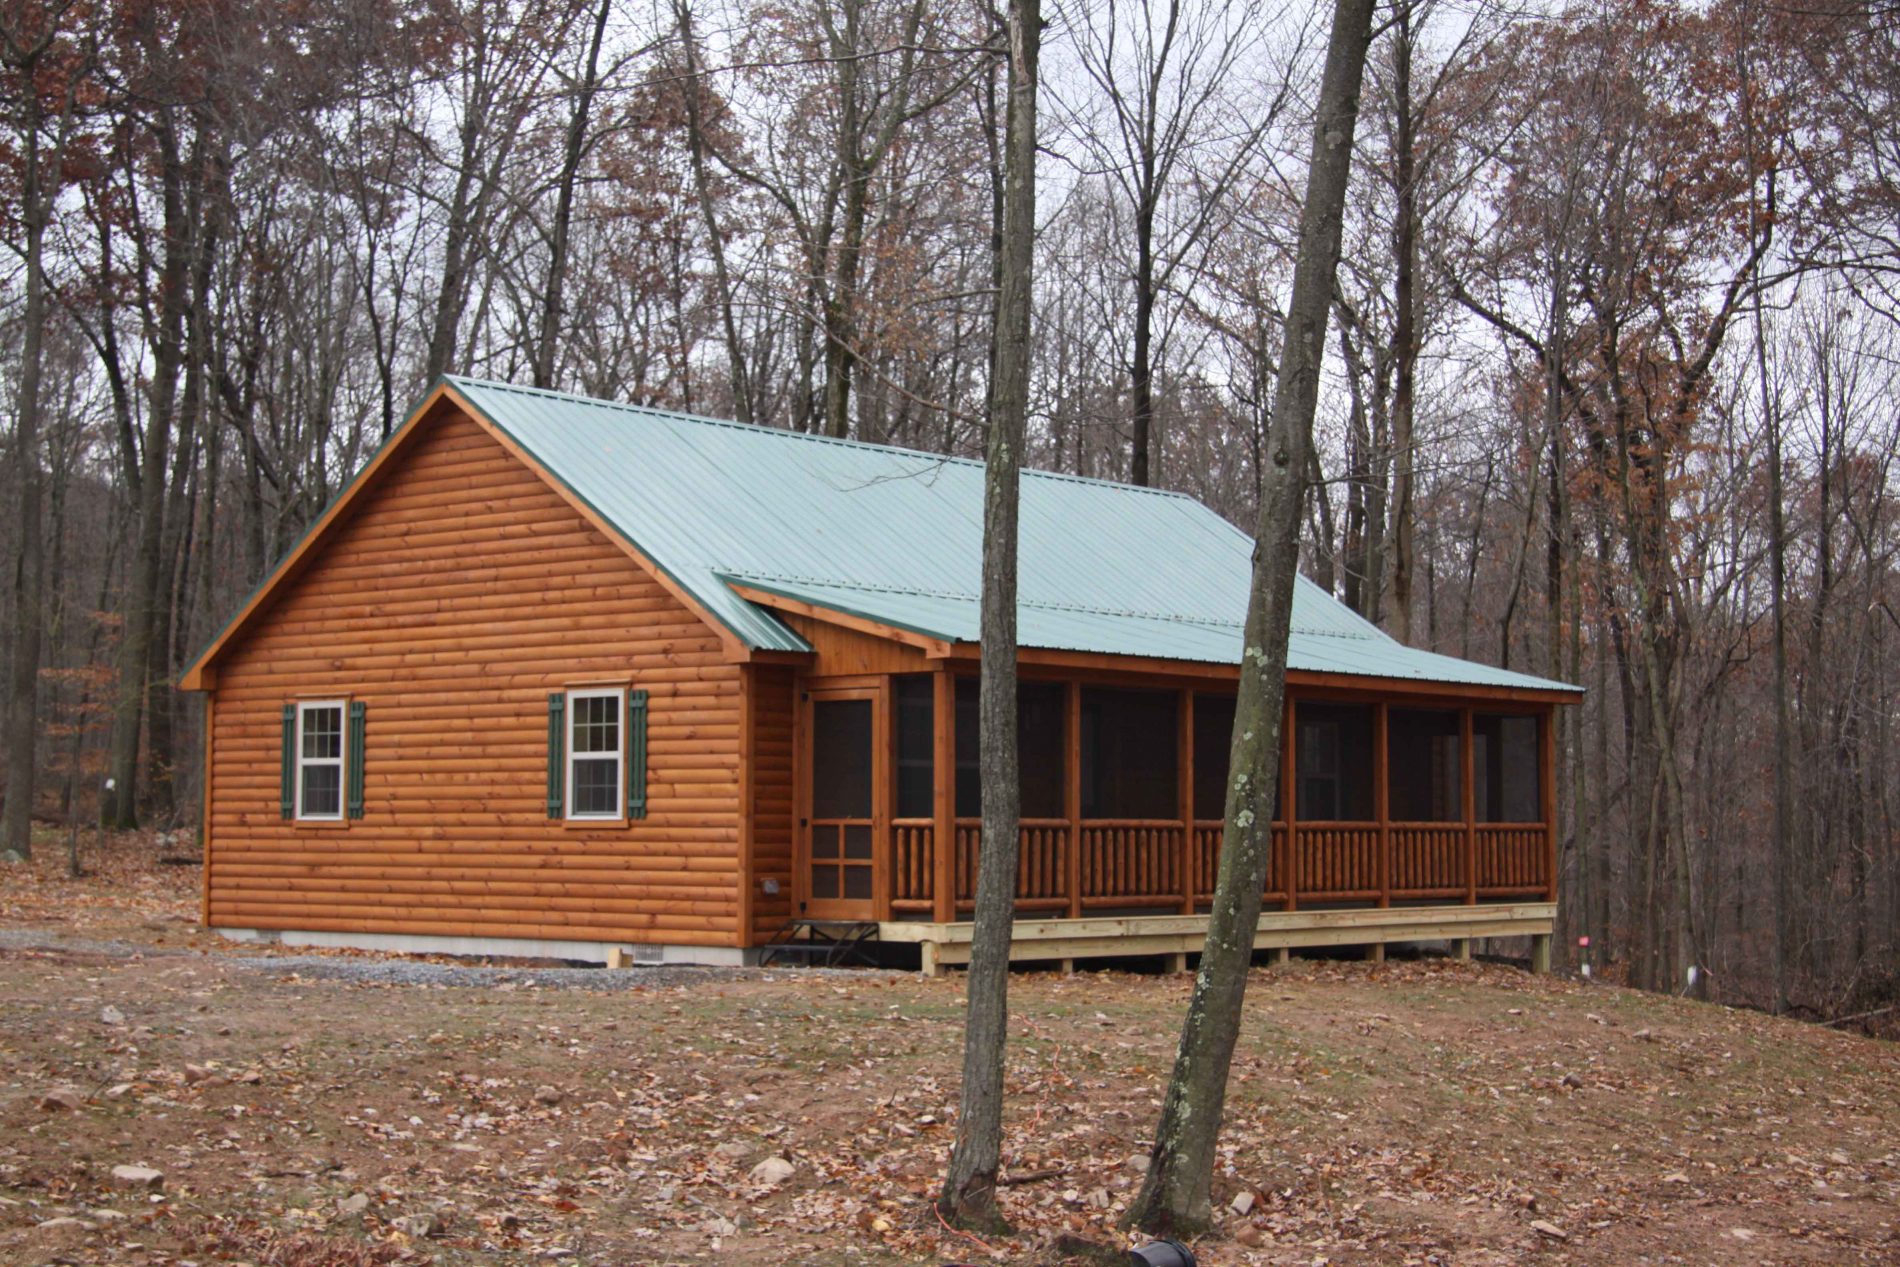 Musketeer Log Cabin | Wooden Houses for Sale | Zook Cabins